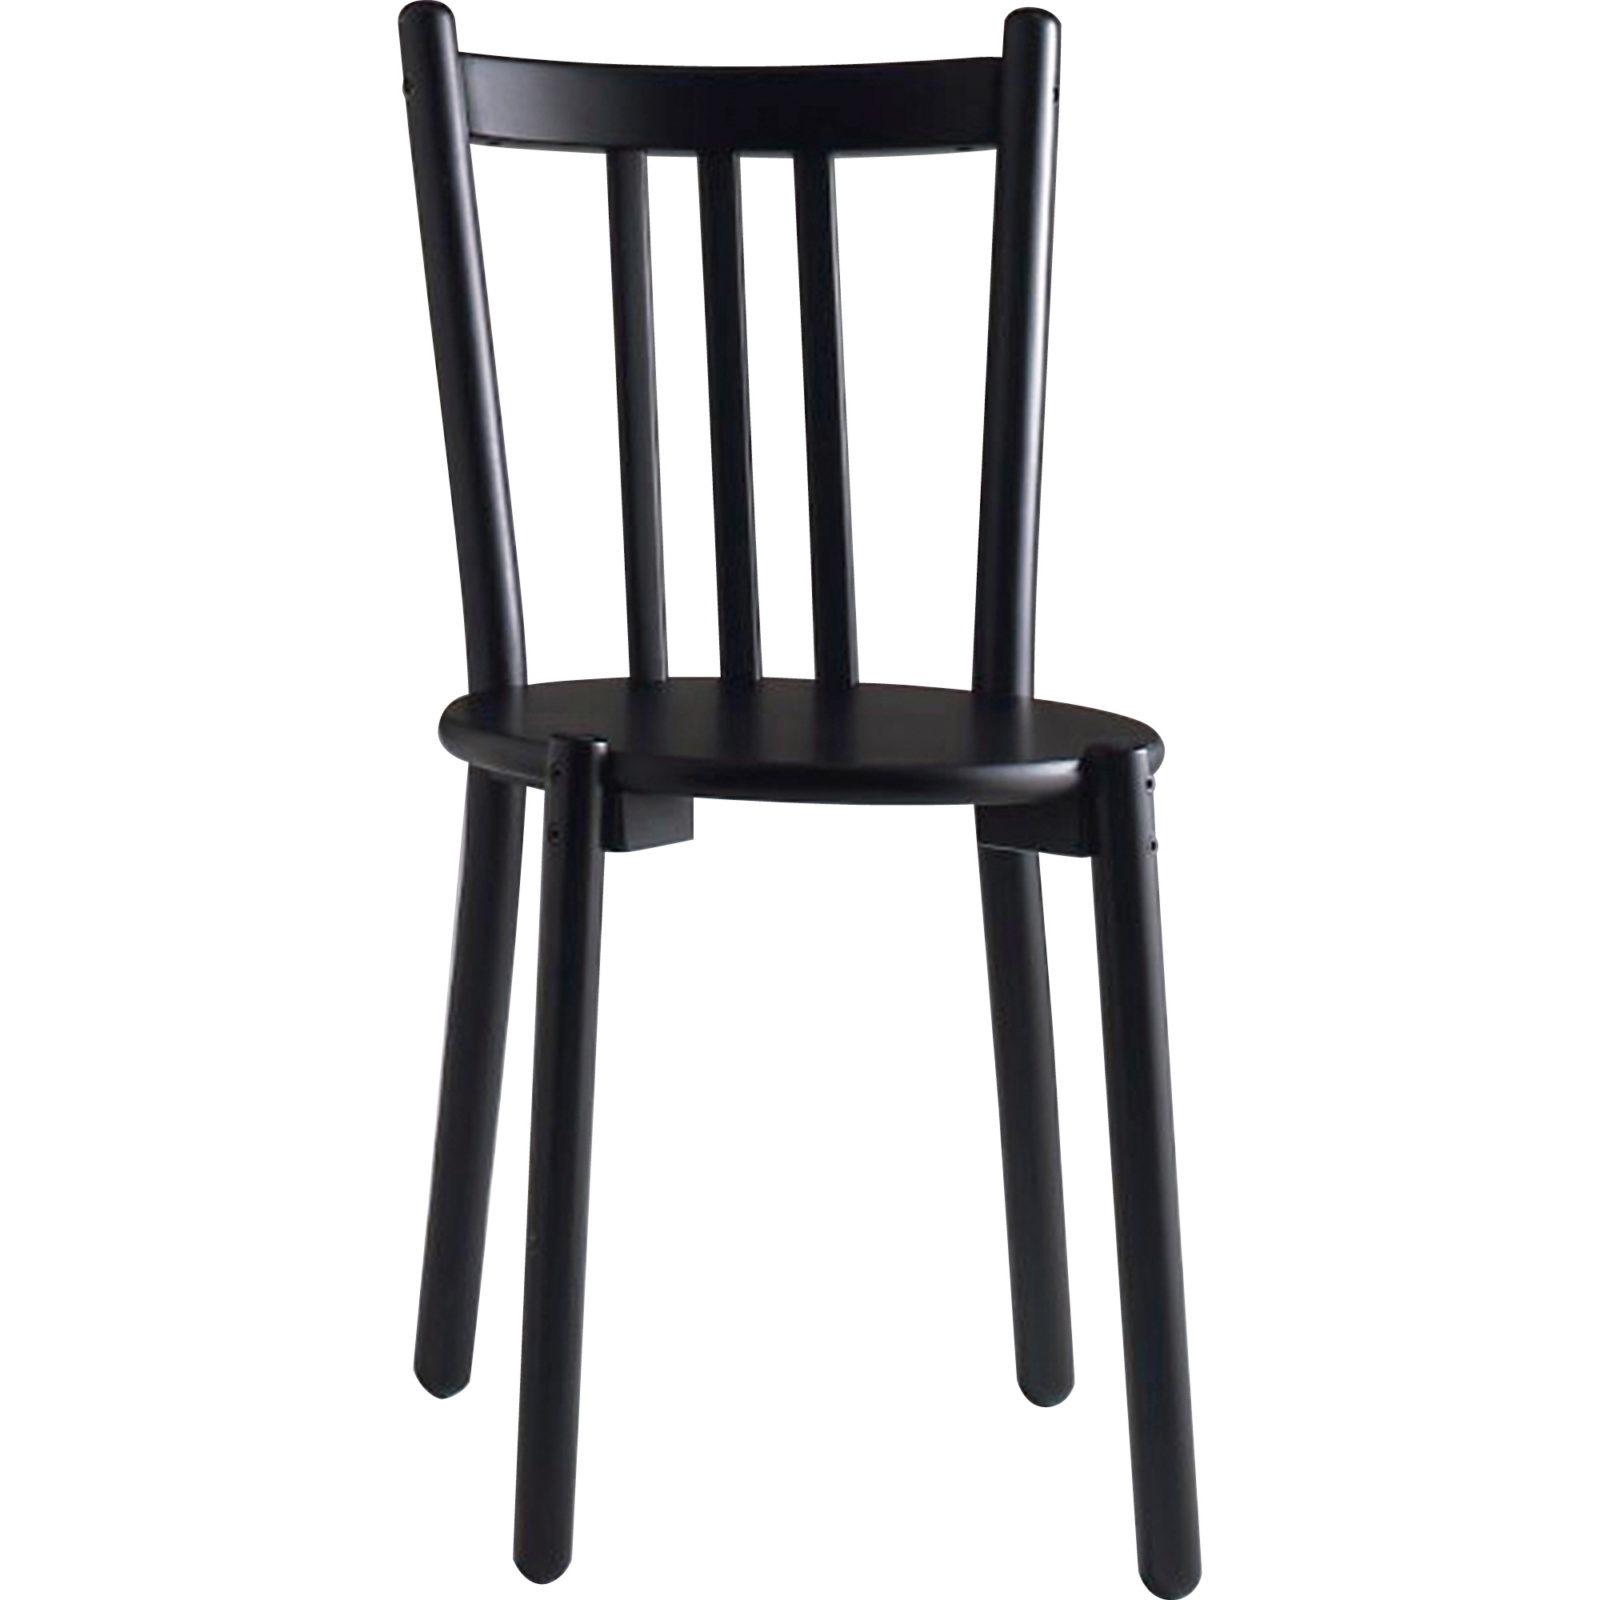 Black wooden chair designed as a simple stool with a backrest, ALBERT.